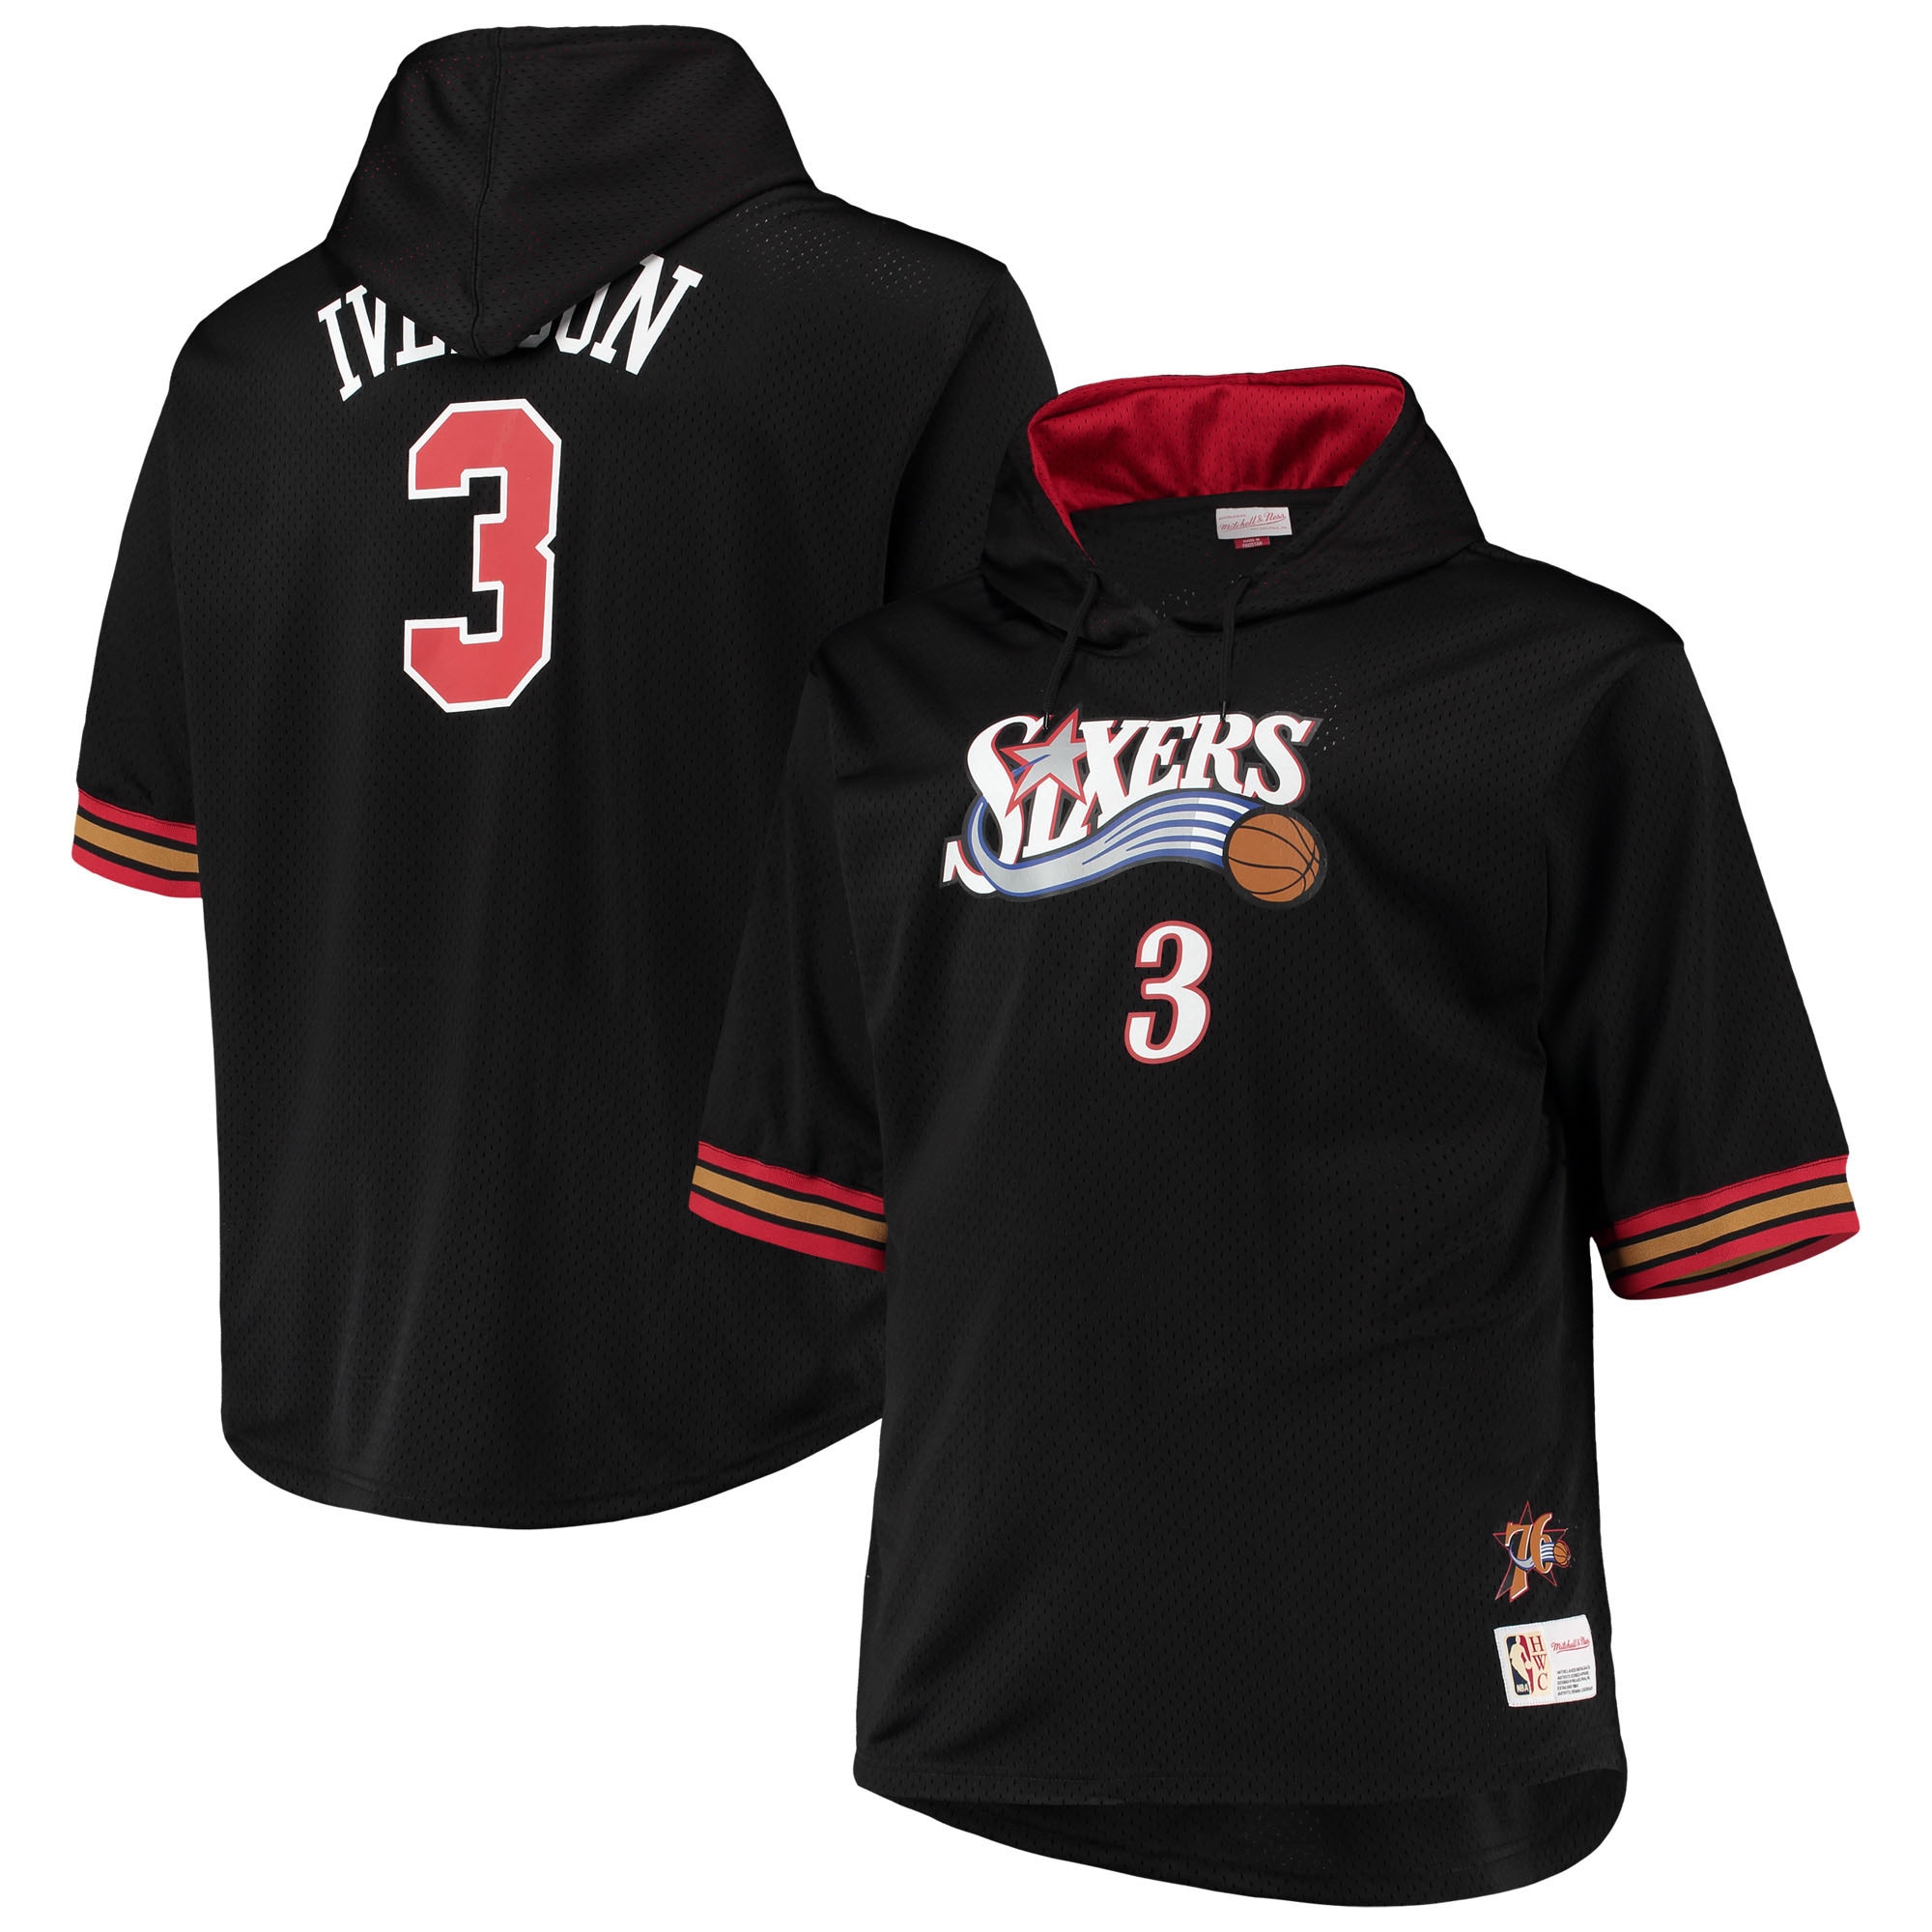 Allen Iverson Philadelphia 76ers Mitchell & Ness Big & Tall Name & Number Short Sleeve Hoodie – Black/Red